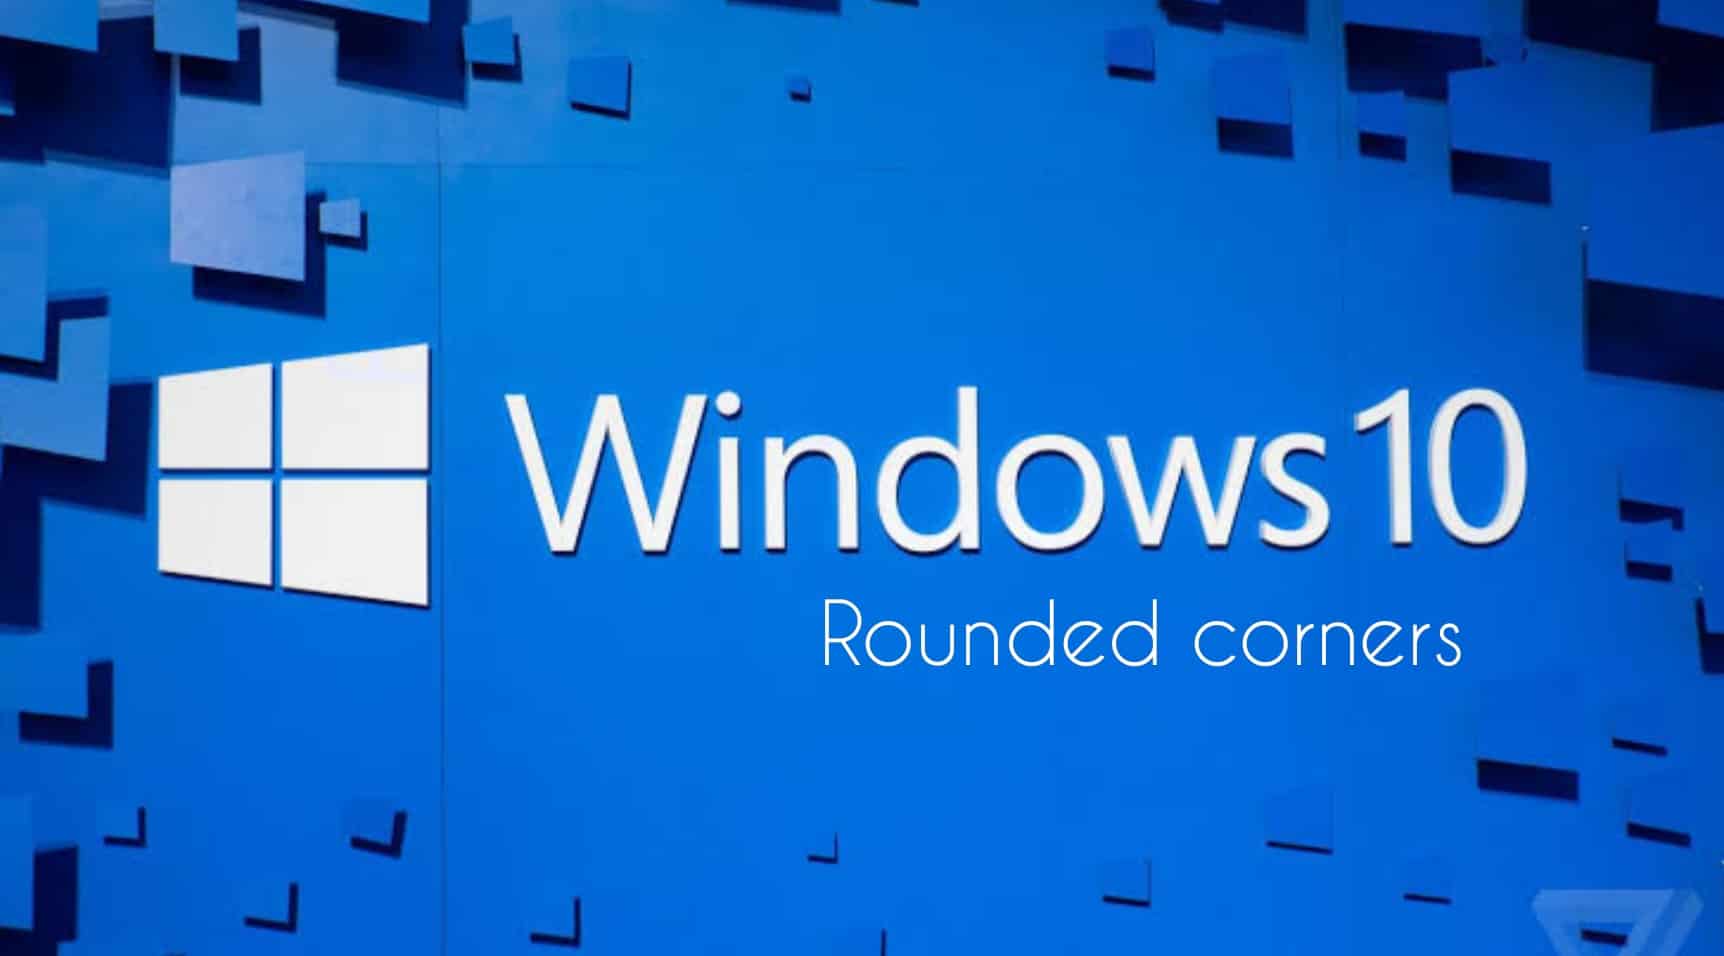 Microsoft Leak Reveals Windows 10 Design Update With Rounded Corners